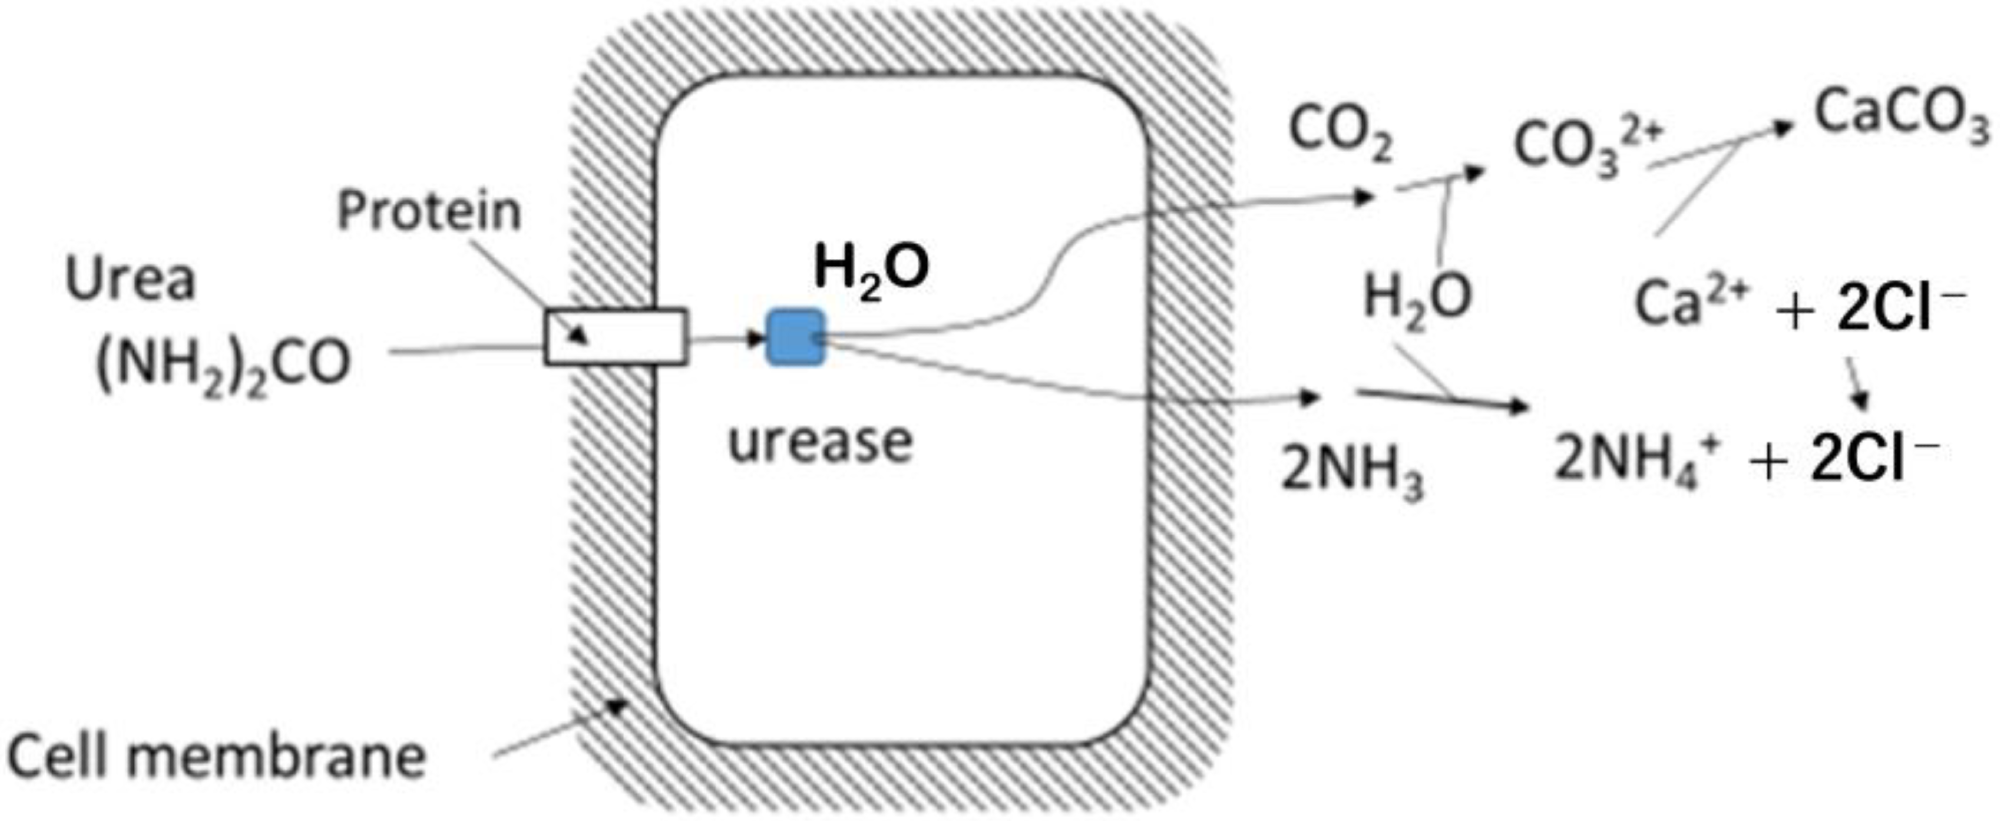 Microbial hydrolysis of urea, showing that first products are CO2 and NH3 inside the microbe’s cell and carbonates are produced outside of the cell.